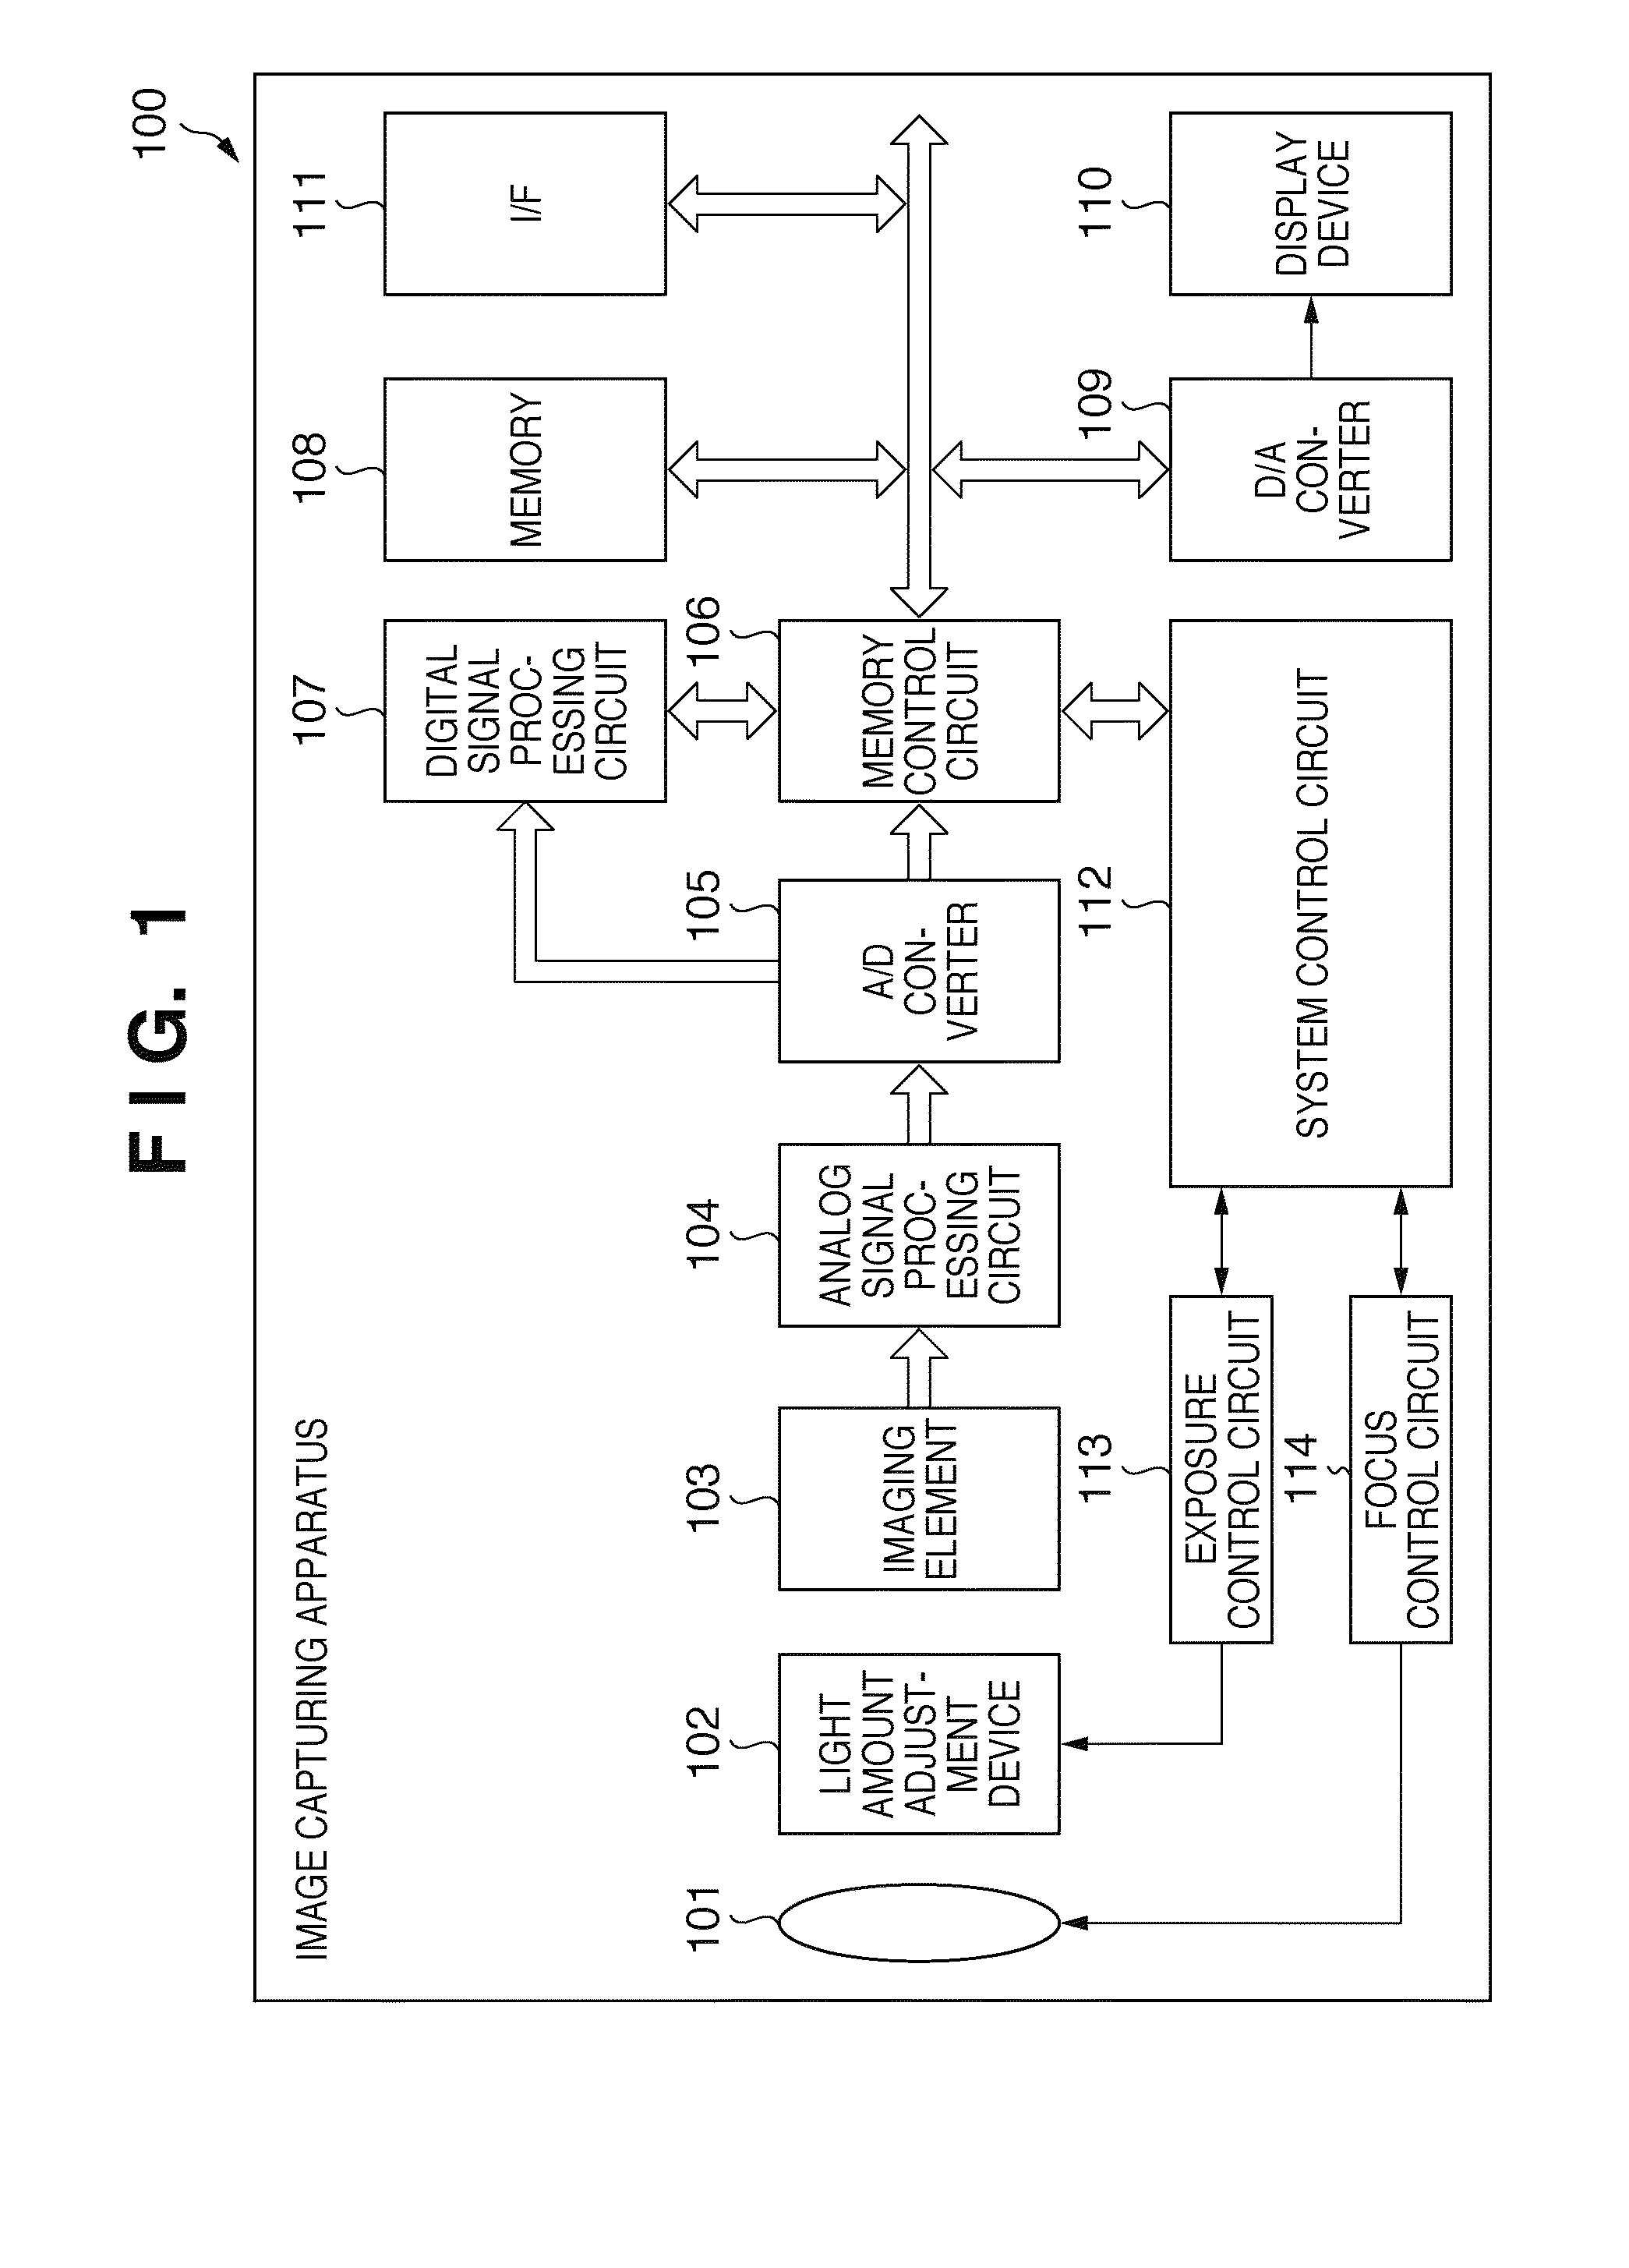 Facial expression recognition apparatus and method, and image capturing apparatus